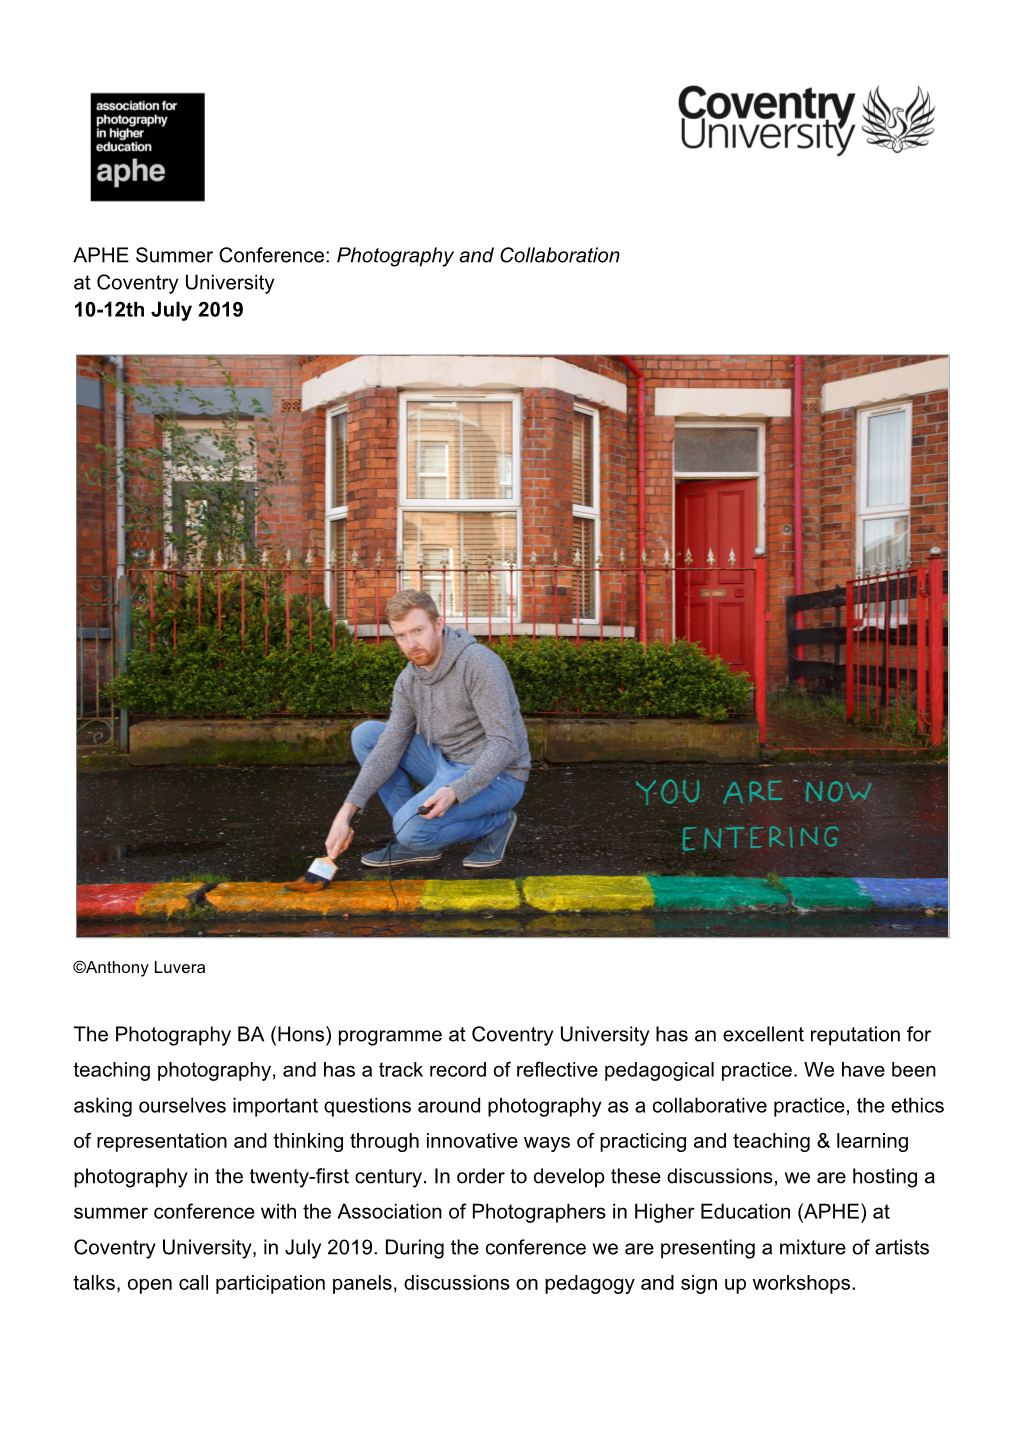 APHE Summer Conference: Photography and Collaboration at Coventry University 10-12Th July 2019